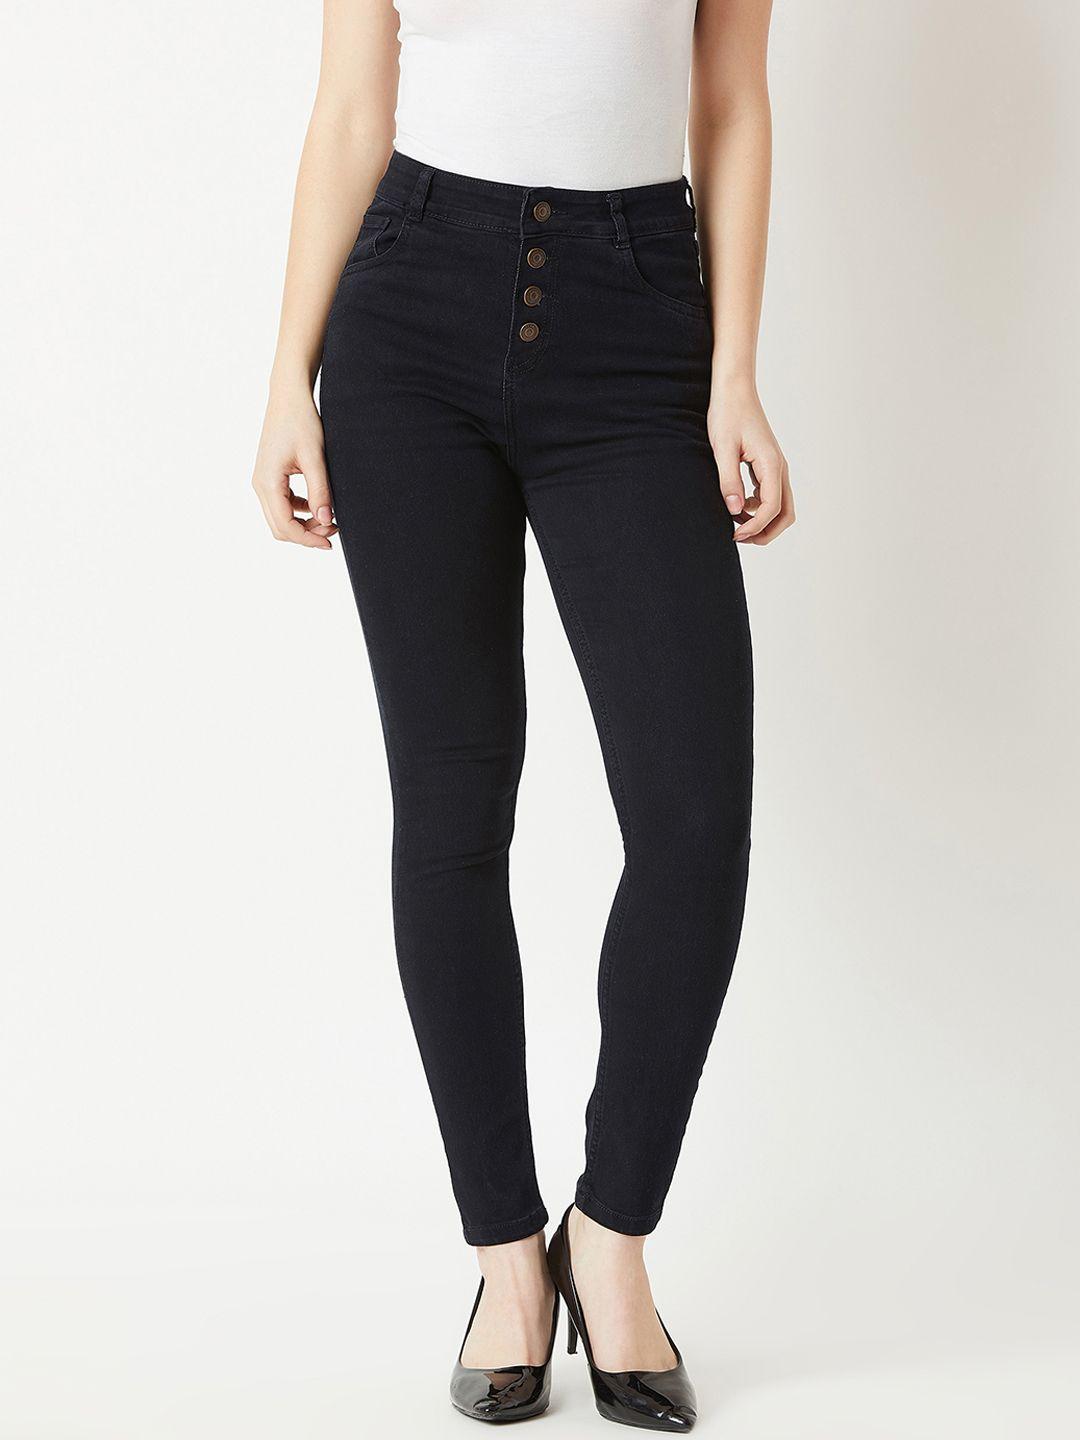 miss-chase-women-black-skinny-fit-high-rise-clean-look-jeans